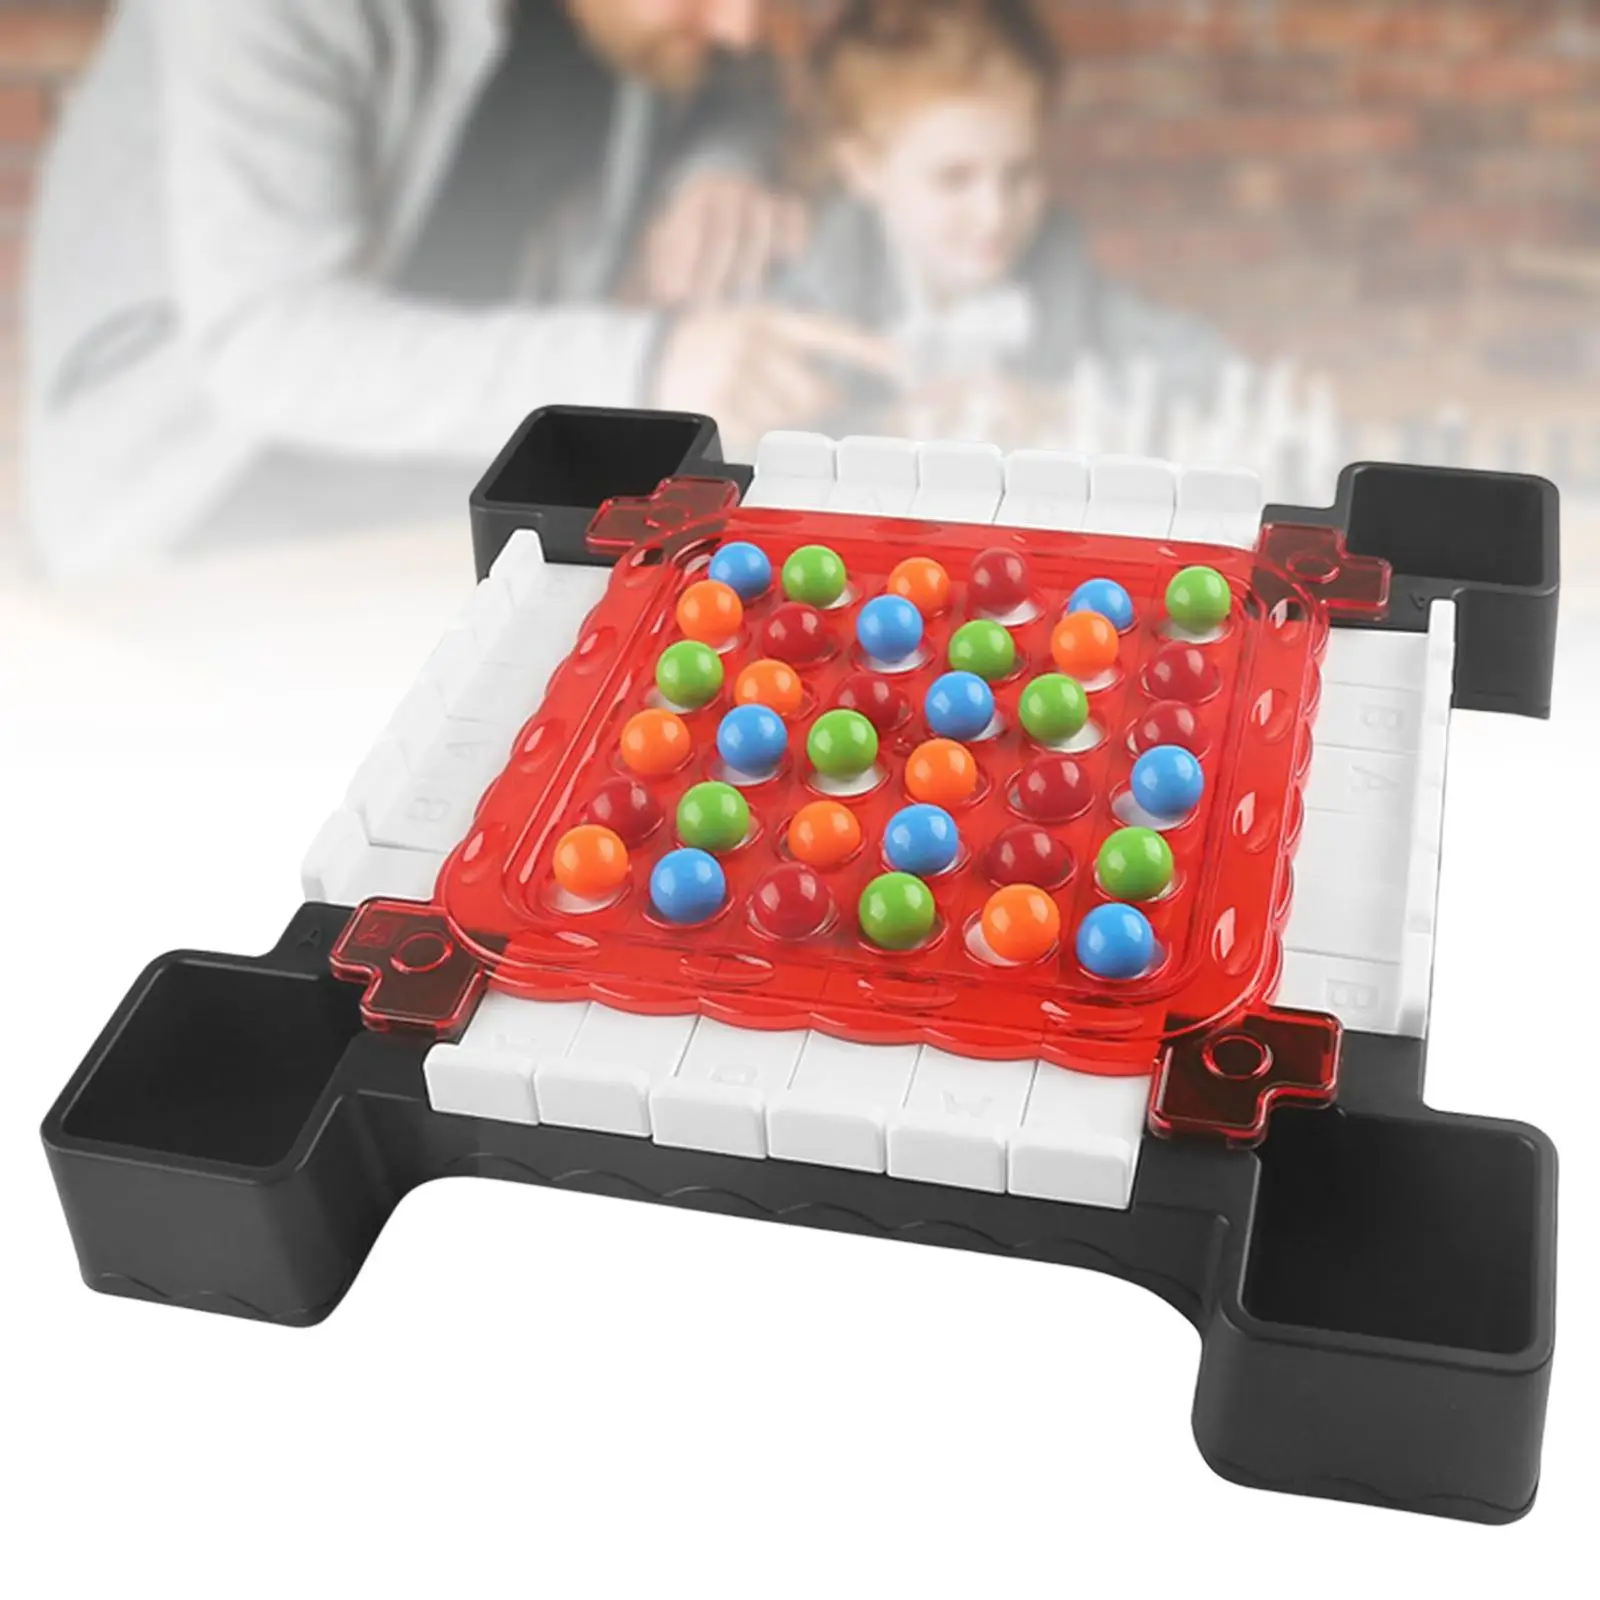 Fun Rainbow Ball Elimination Game Tabletop Game Toys Rainbow Ball Matching Game for Parent Child Game Kids Adults Boys Girls